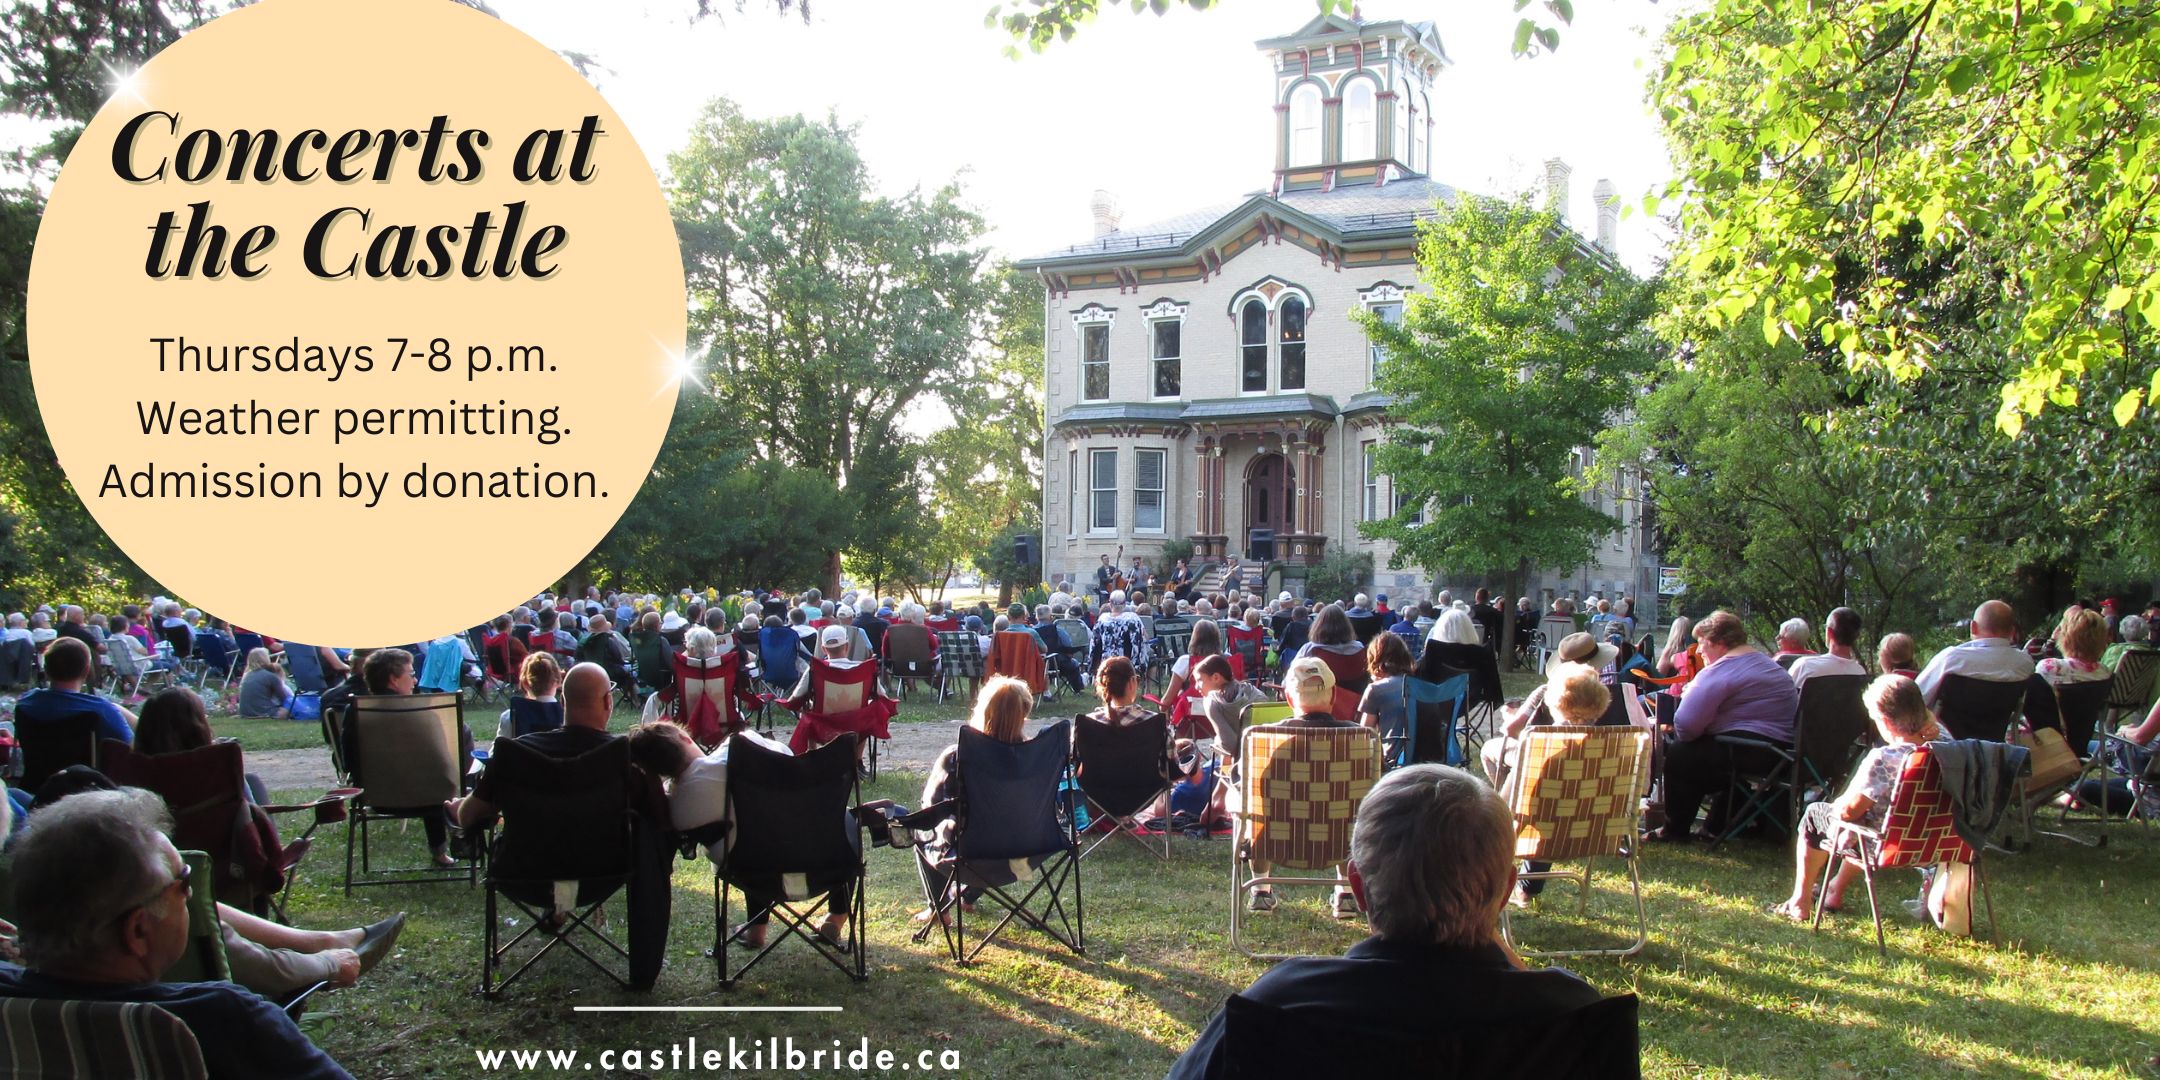 Front lawn of Castle kilbride people in lawn chairs listening to live music